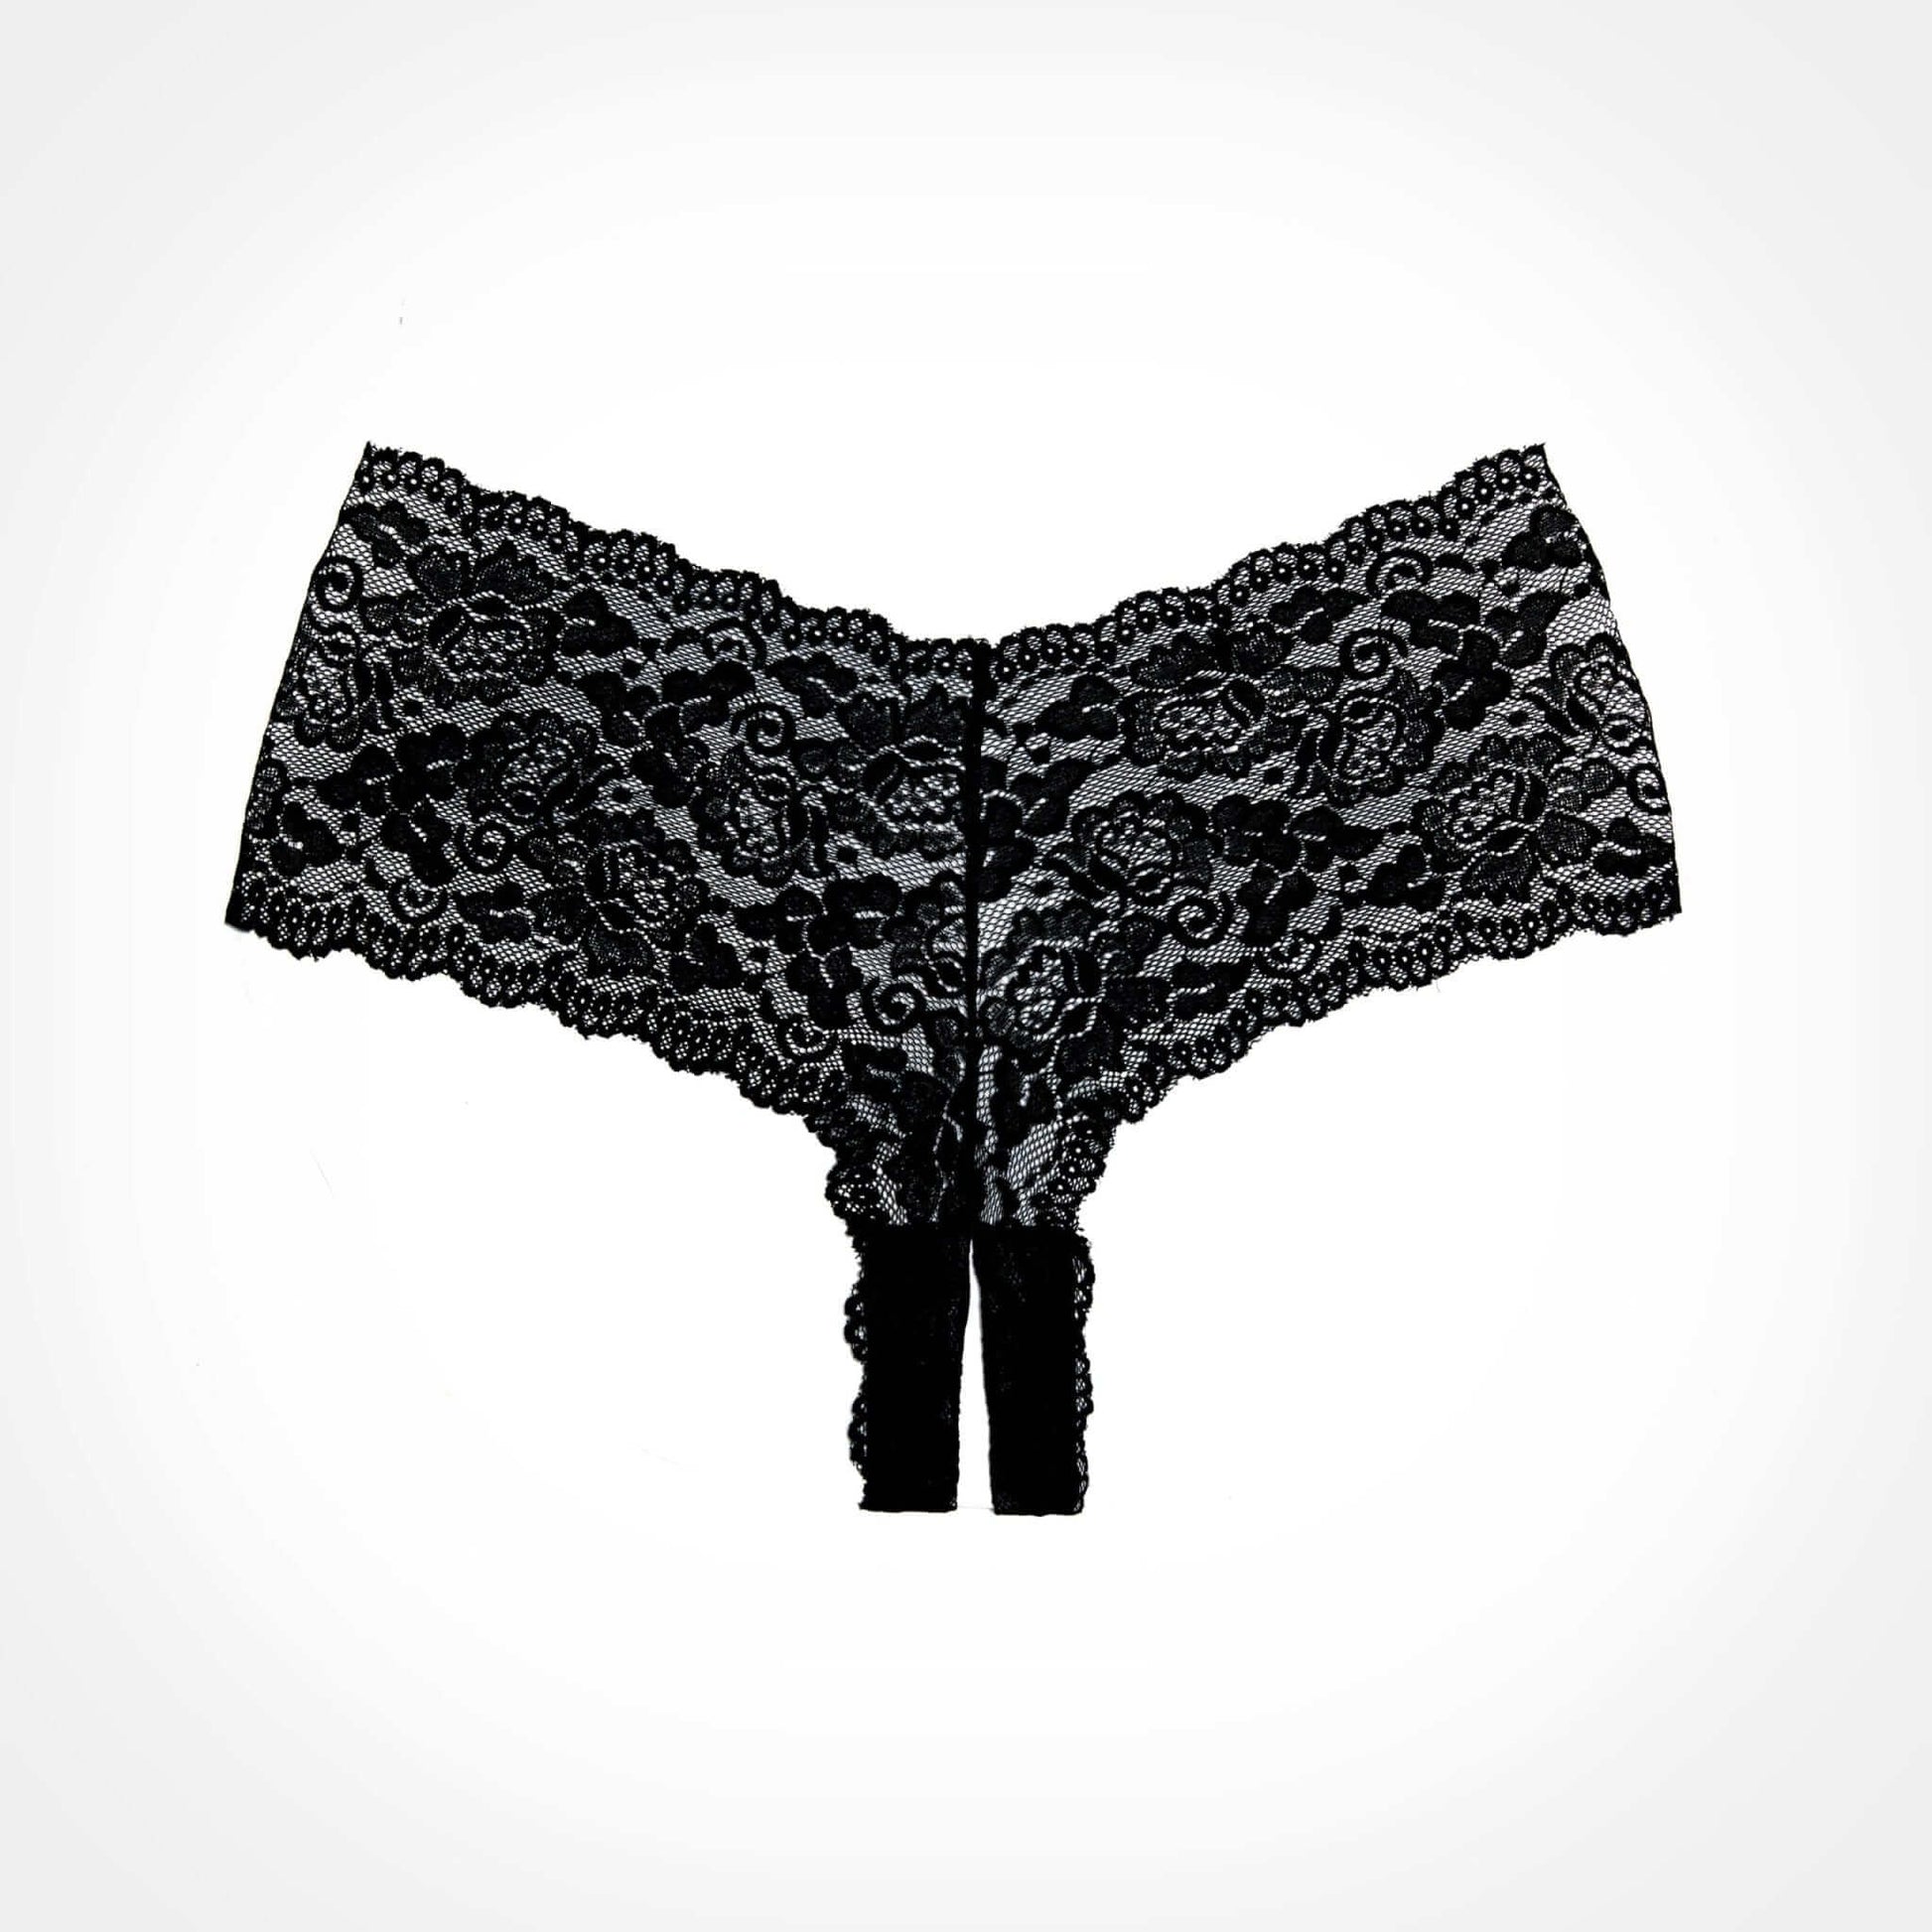 Candy Apple Crotchless Lace Booty Shorts/ Panties - Black - Thorn & Feather Sex Toy Canada